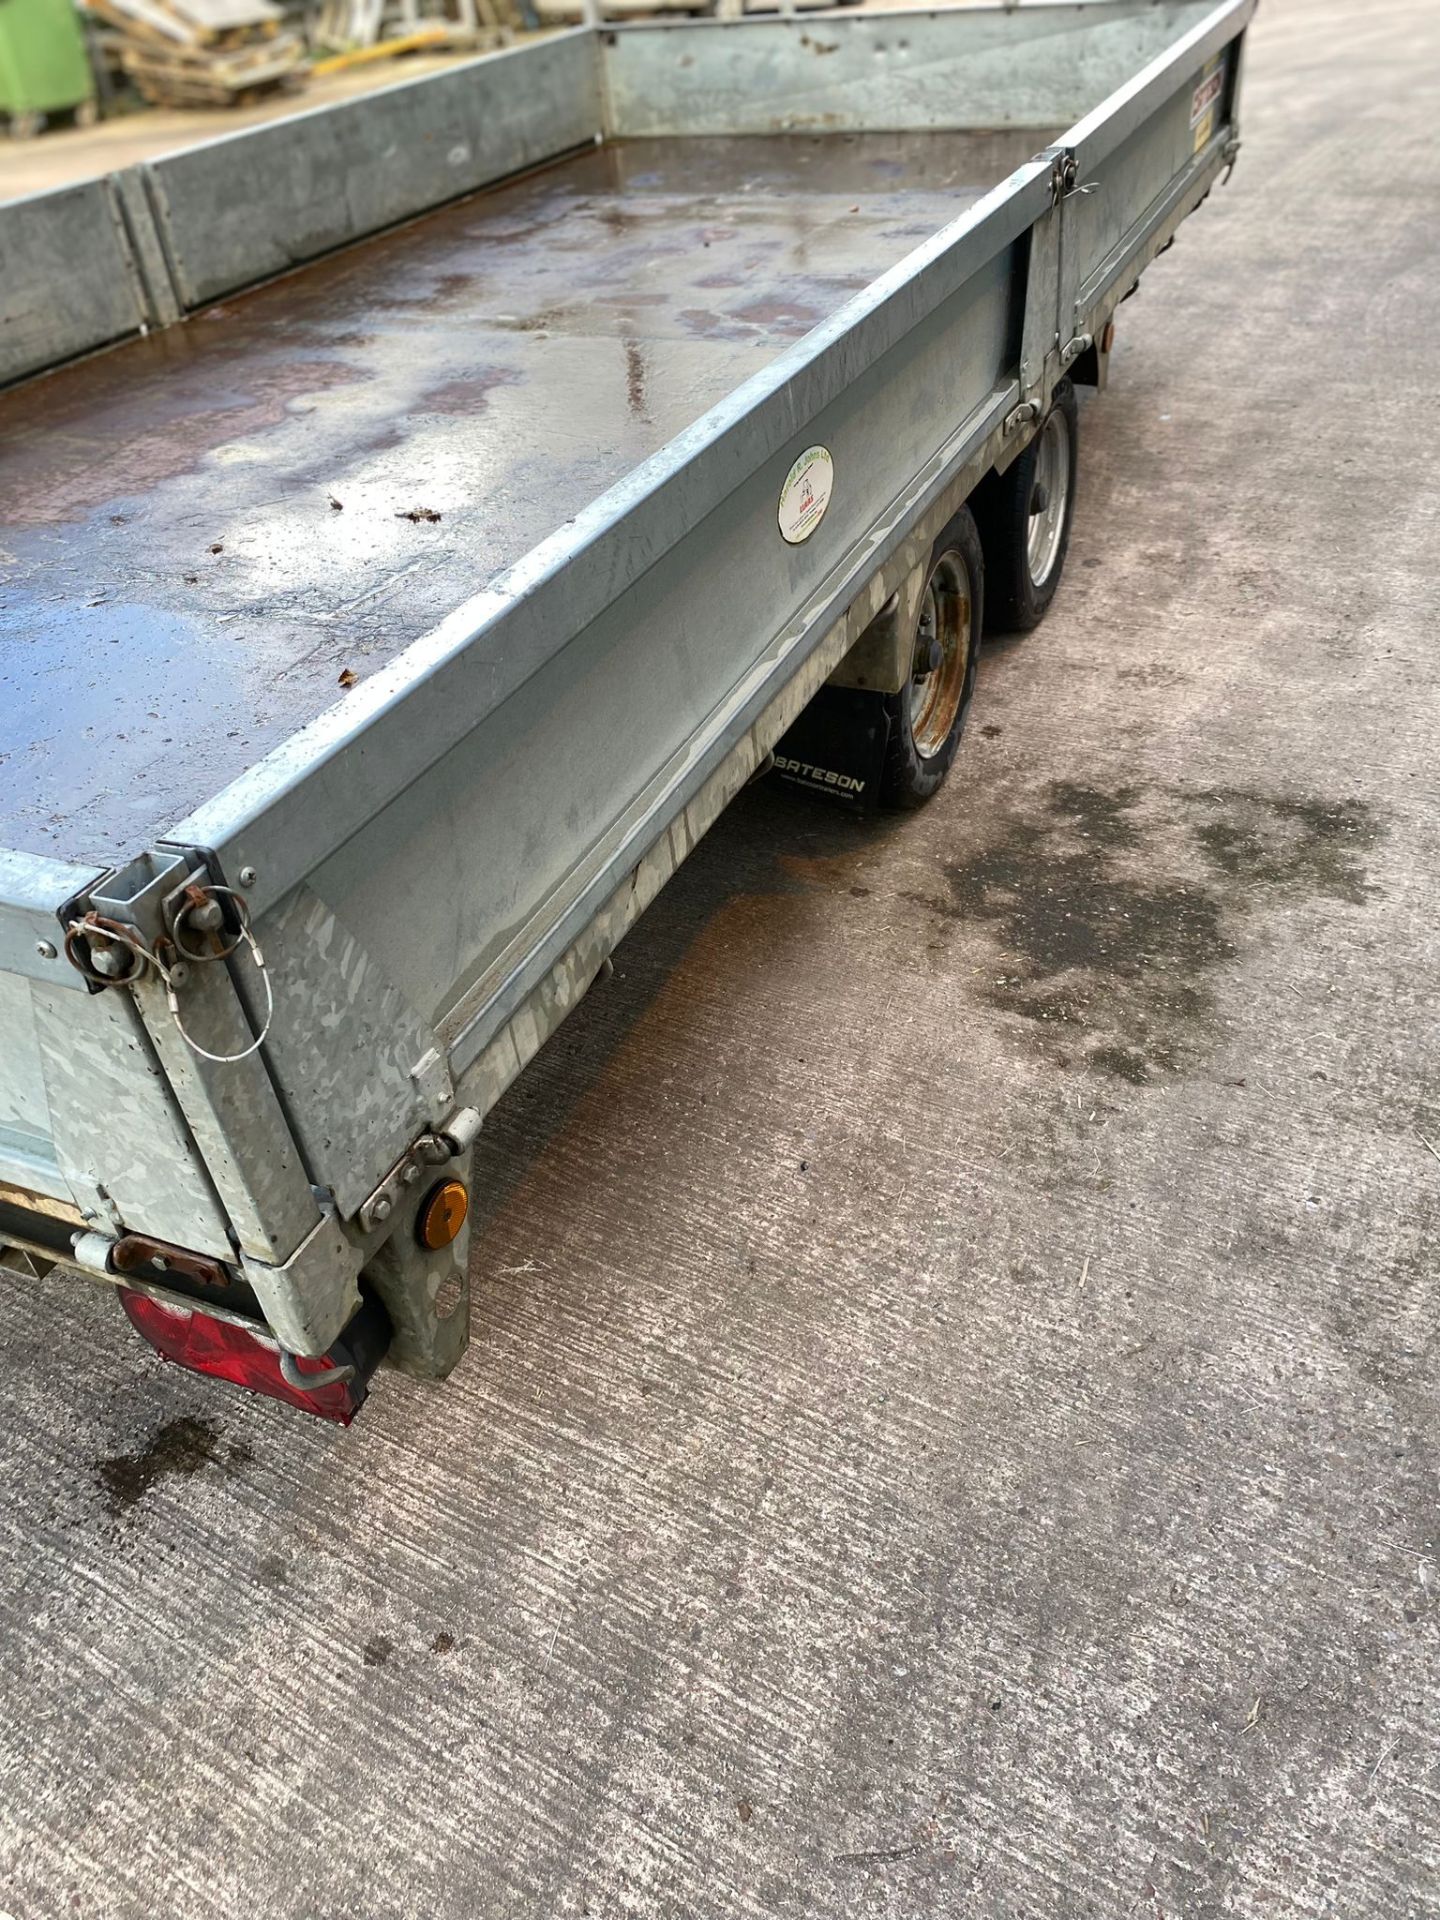 2007 BATESON TRAILER - IN VERY GOOD CONDITION WITH RAMPS, BRAKES ALL WORK, LIGHTS ALL WORK - Image 7 of 11